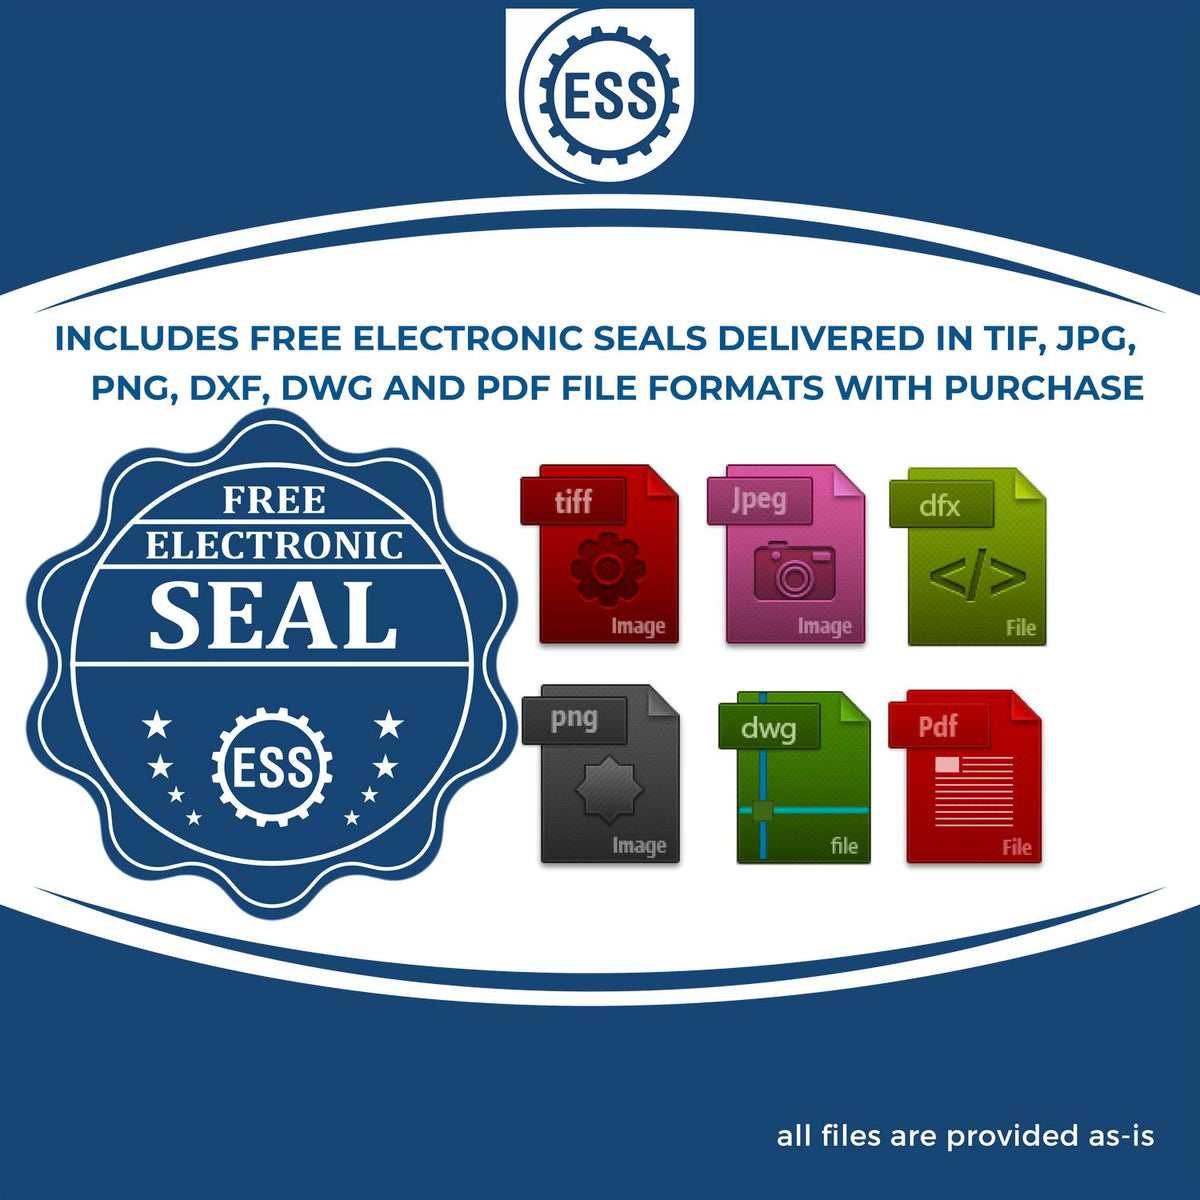 An infographic for the free electronic seal for the Self-Inking Rectangular Indiana Notary Stamp illustrating the different file type icons such as DXF, DWG, TIF, JPG and PNG.